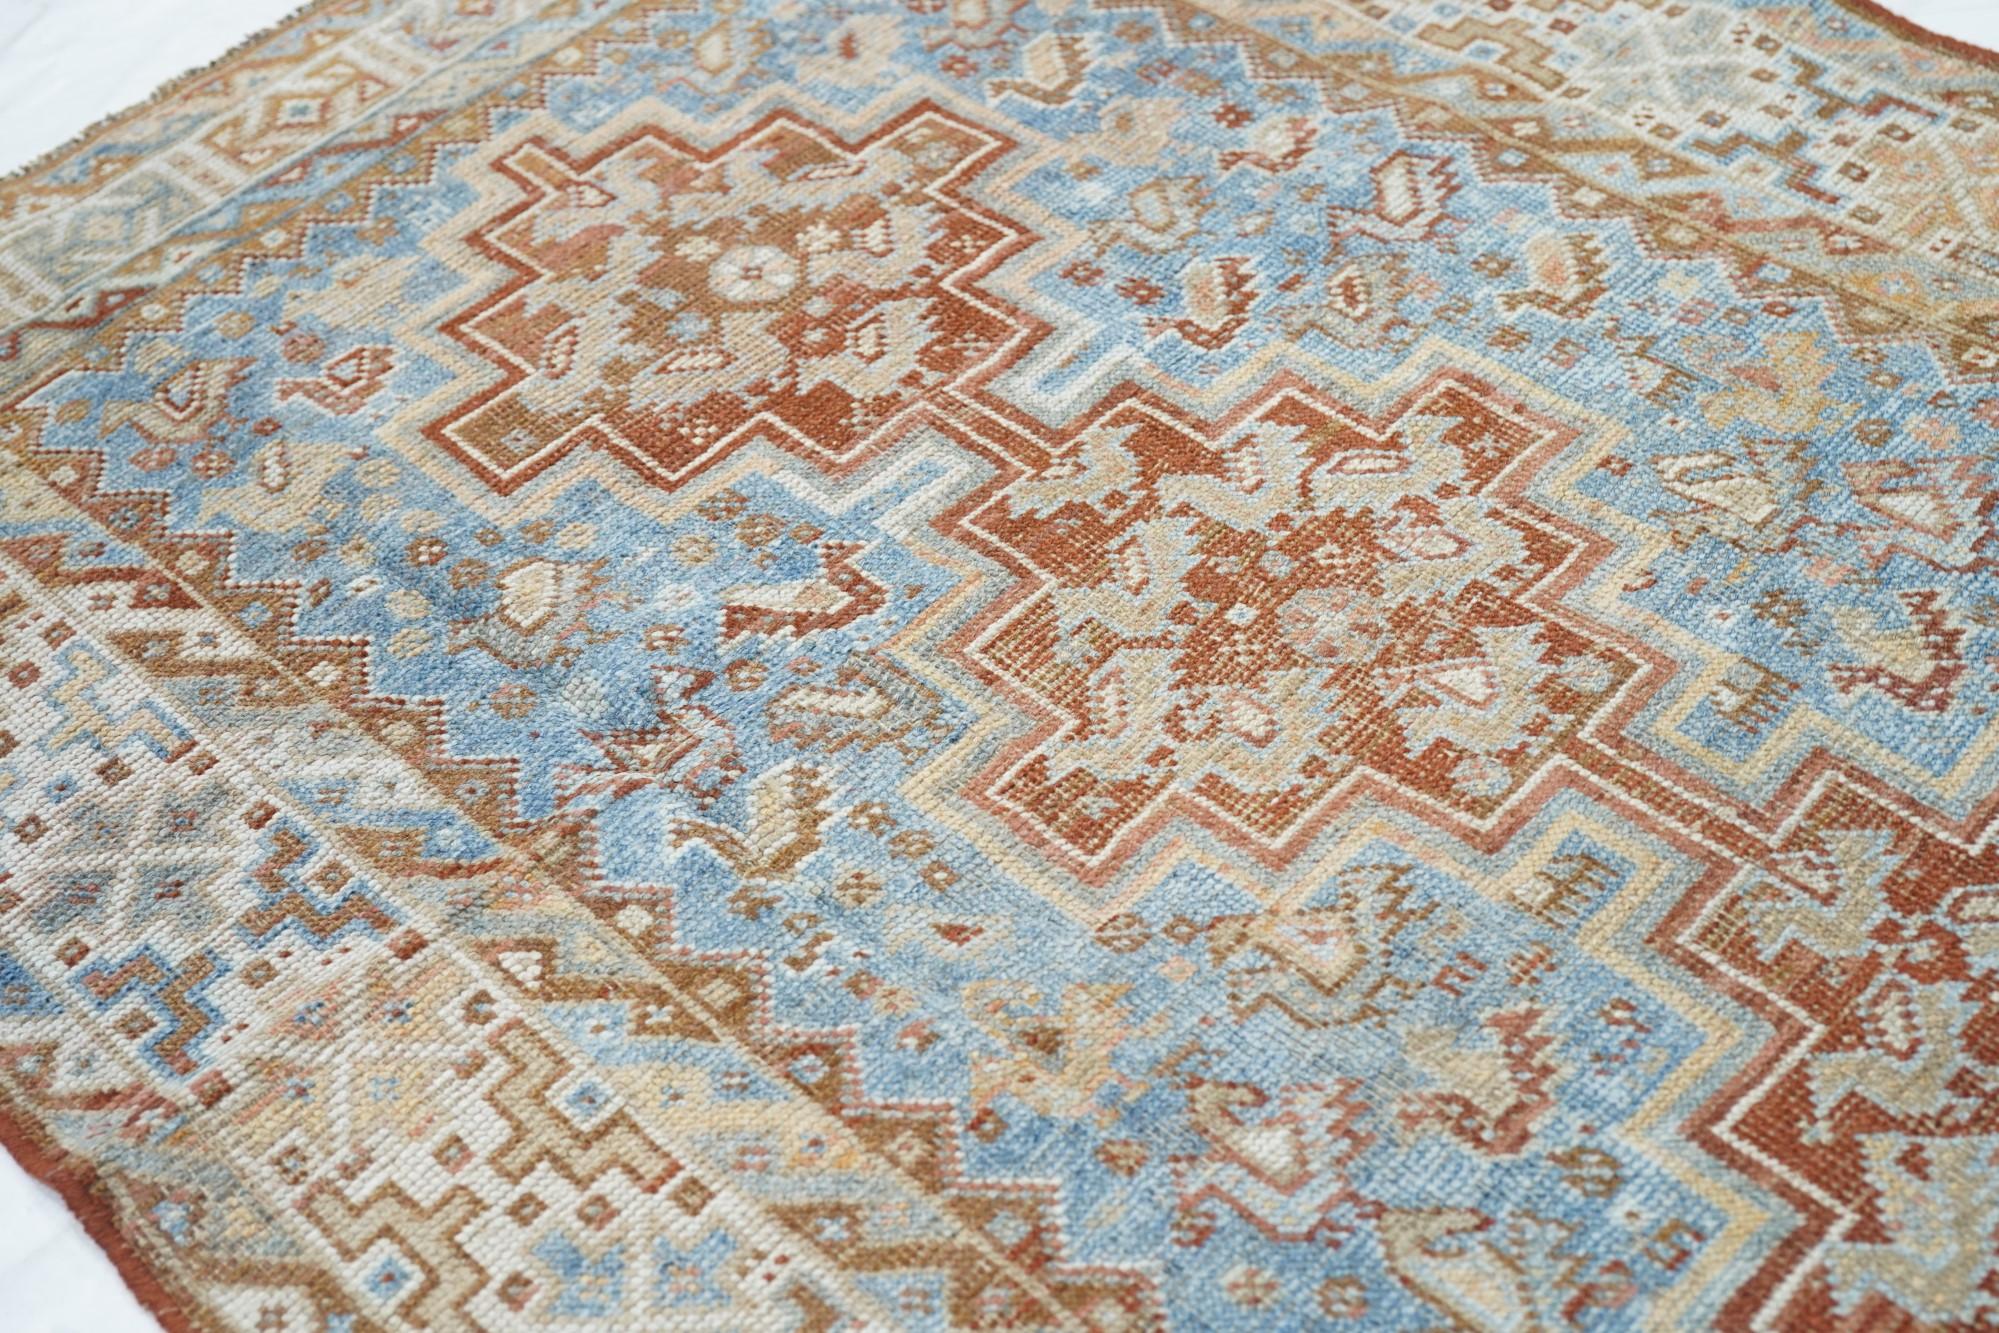 Antique Persian Shiraz Rug 3'1'' x 4'9'' In Excellent Condition For Sale In New York, NY